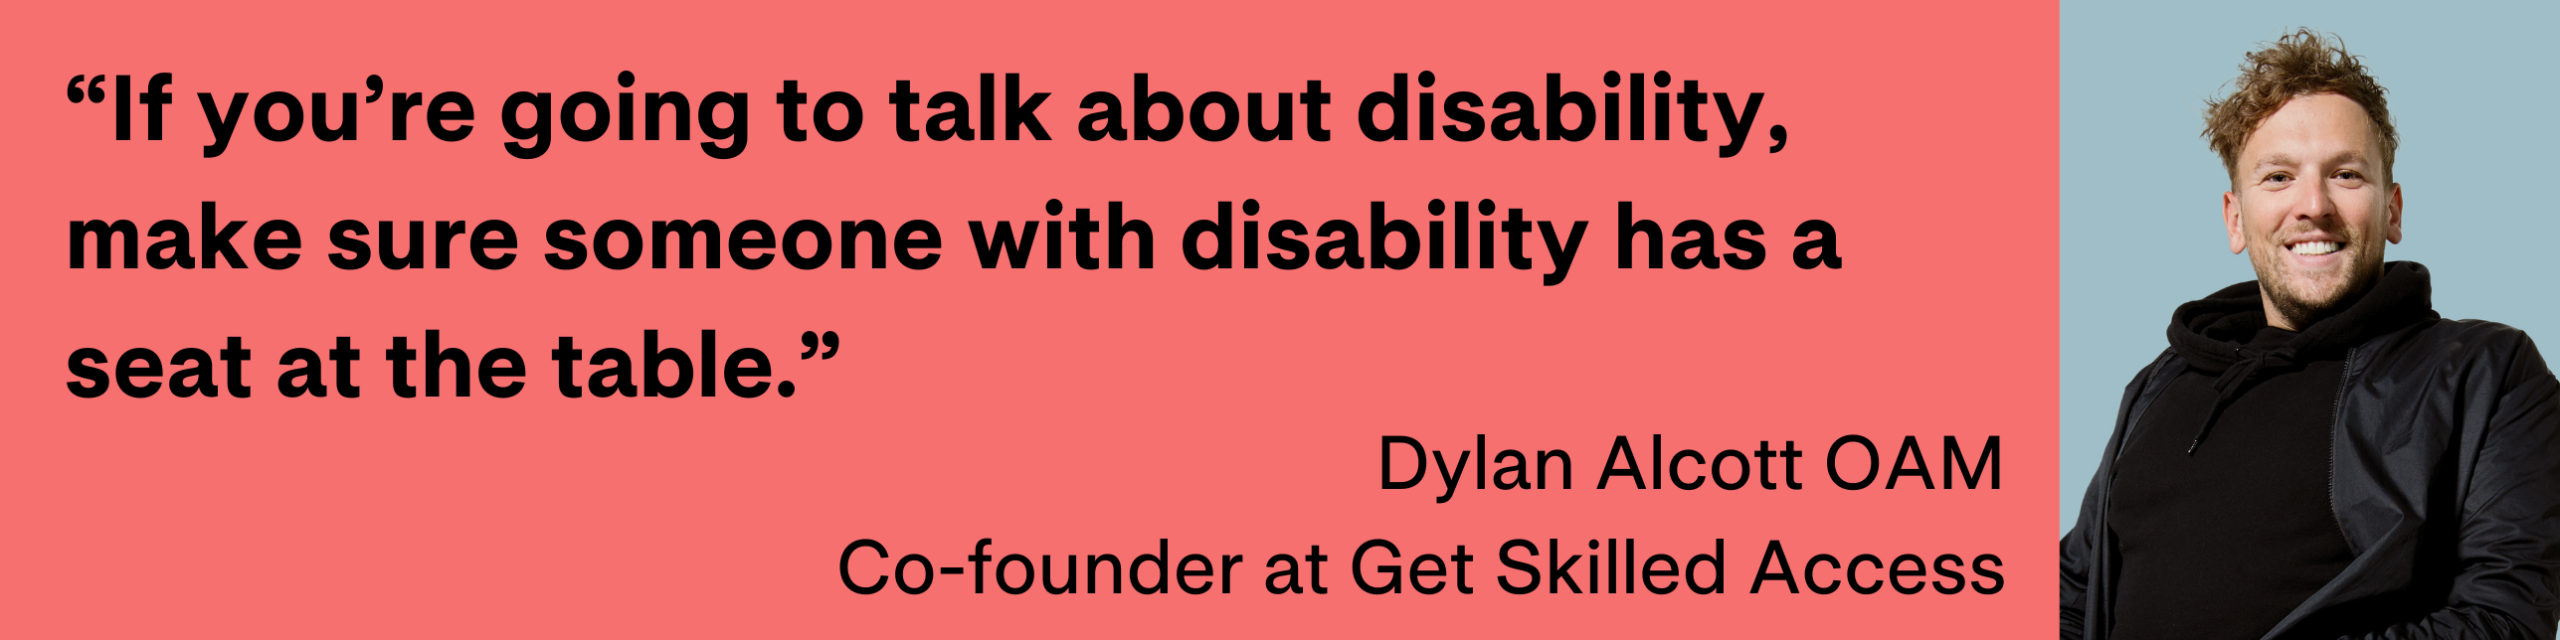 Dylan Alcott's quote along with his image. The quote reads "“If you’re going to talk about disability, make sure someone with disability has a seat at the table.”